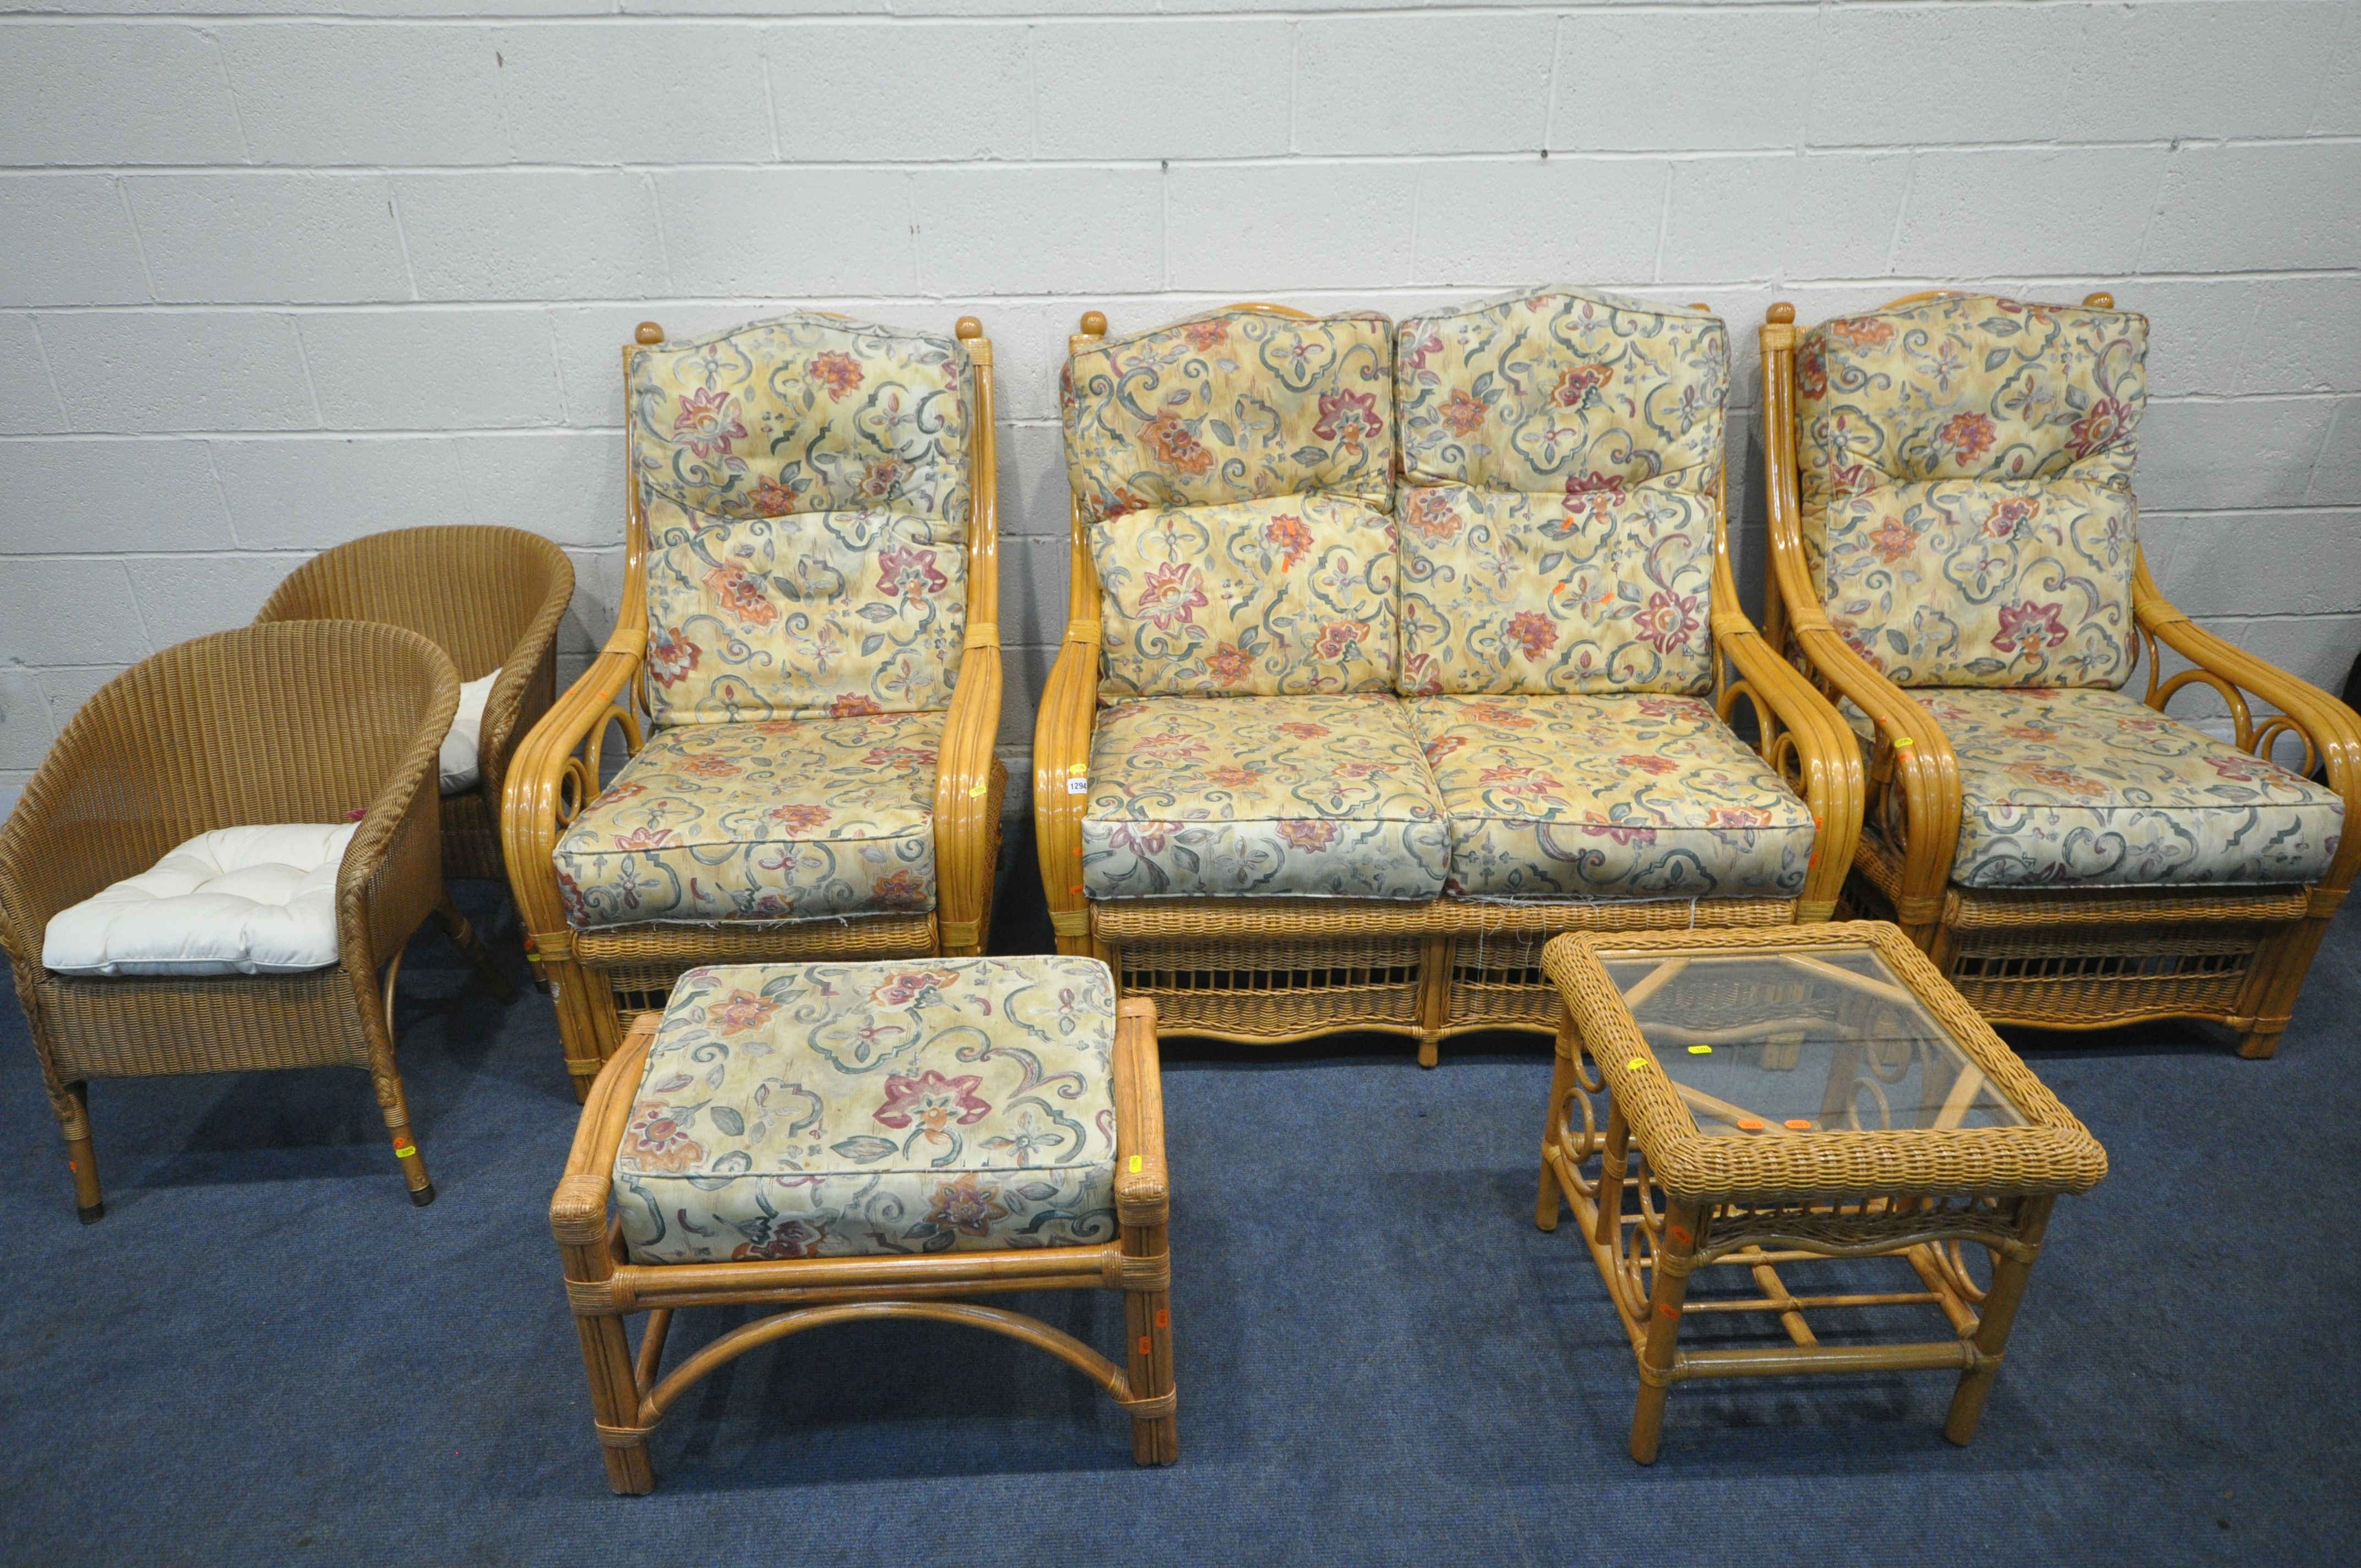 A RATTAN FIVE PIECE CONSERVATORY SUITE, comprising a two seater sofa, a pair of armchairs, a